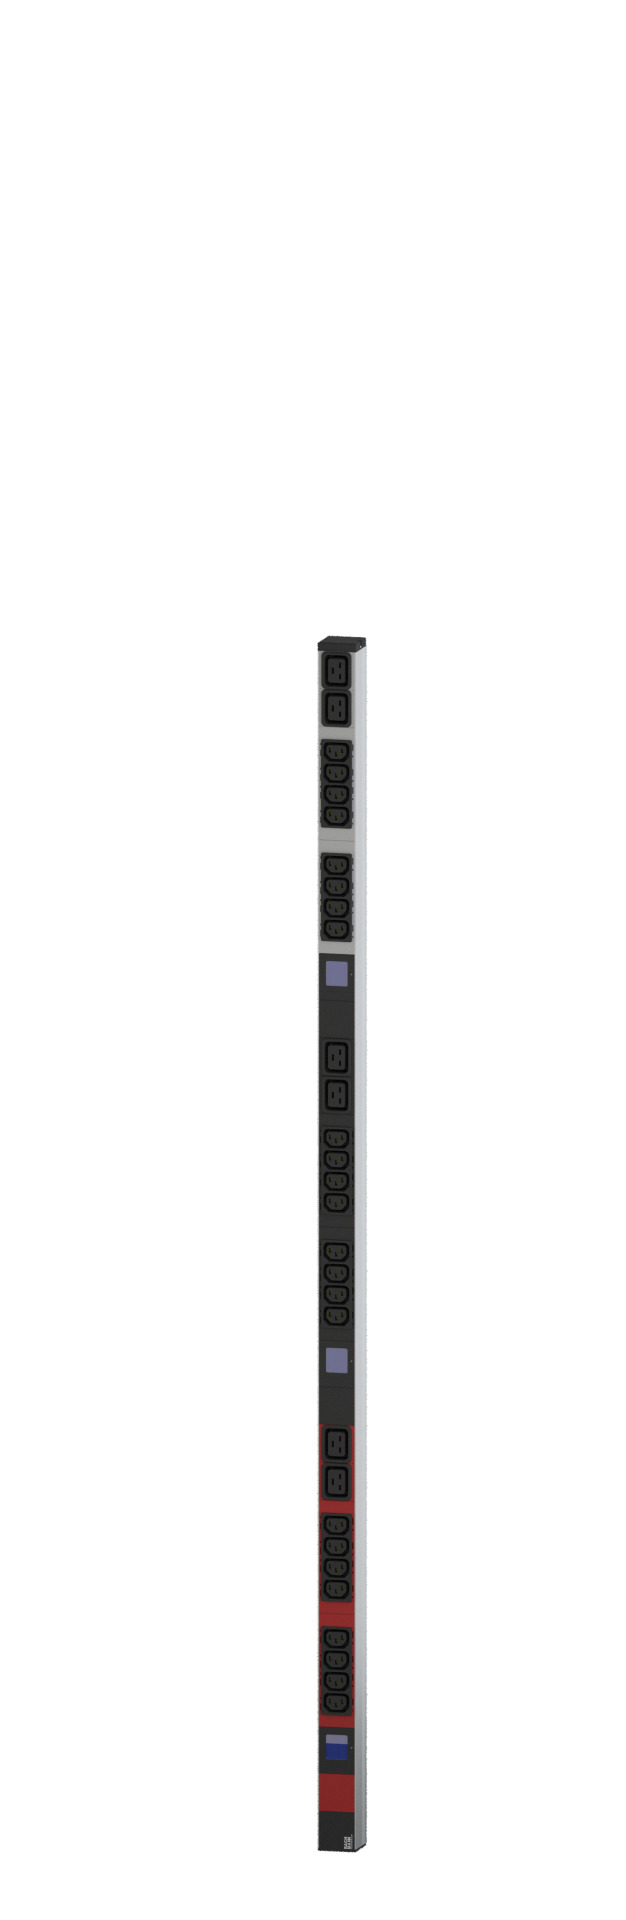 PDU Vertical BN500 24xC13 6xC19 400V 16A with Power Measuring (Display)